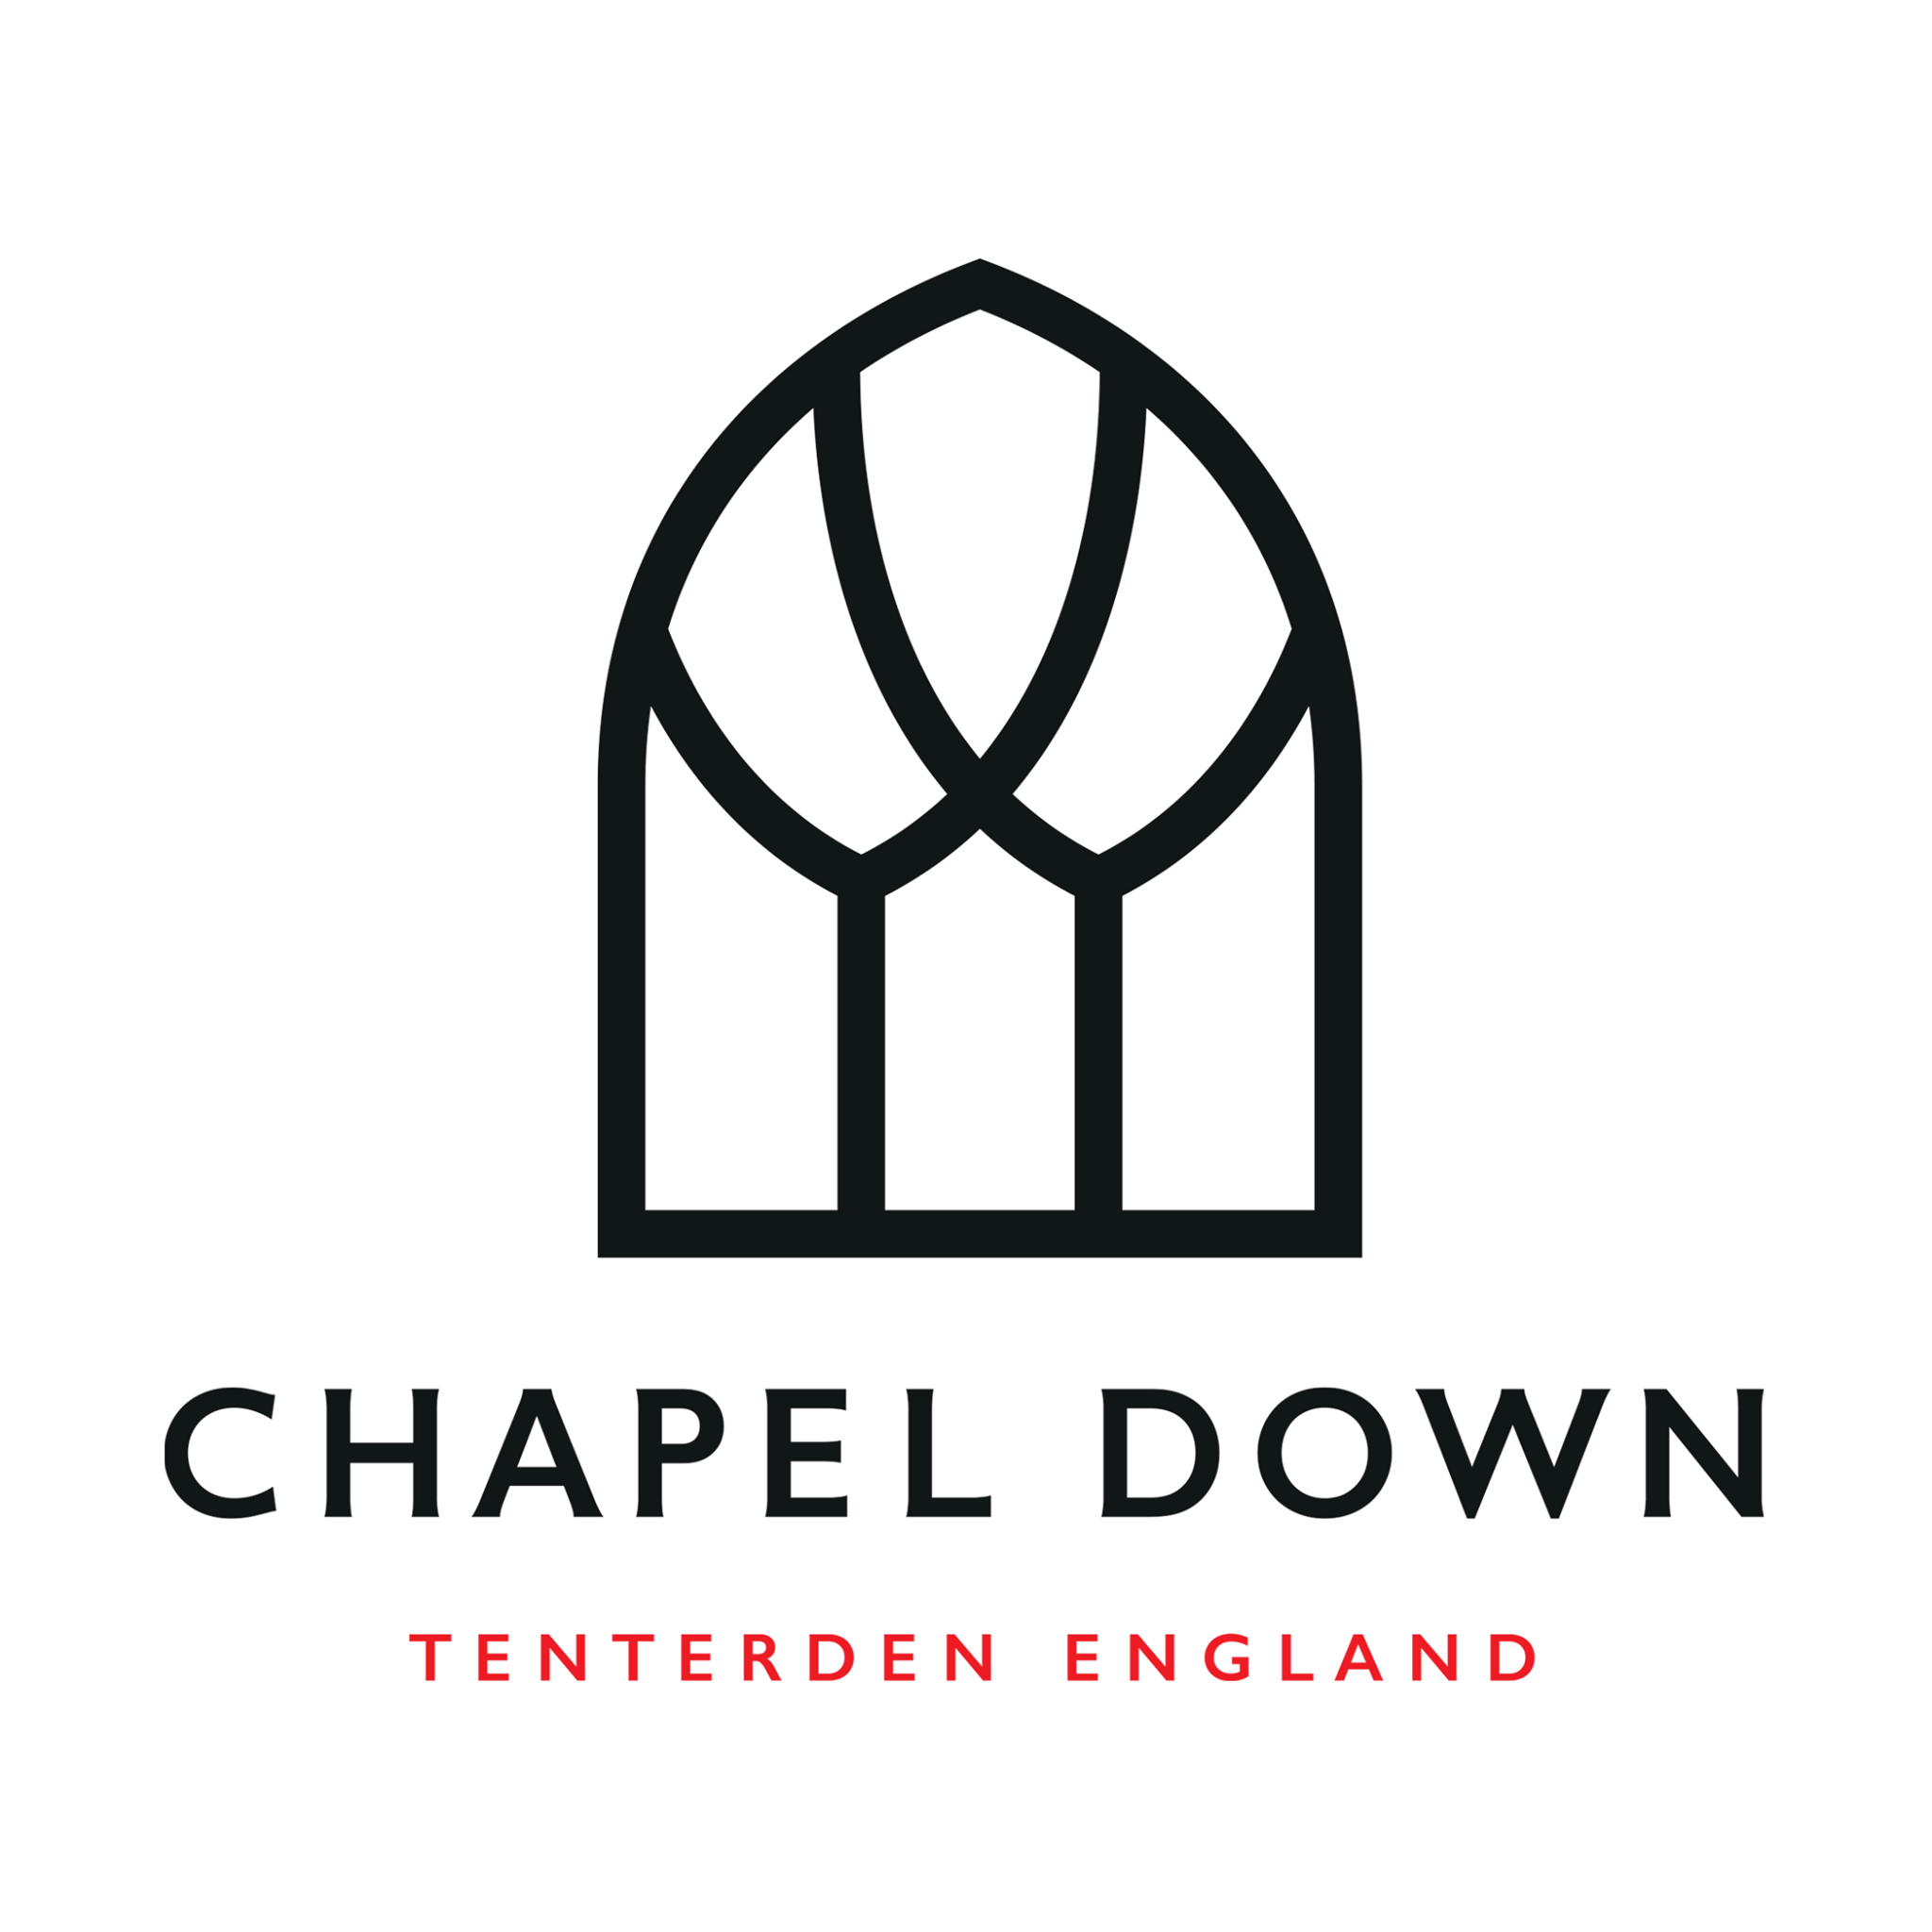 Down in the Chapel